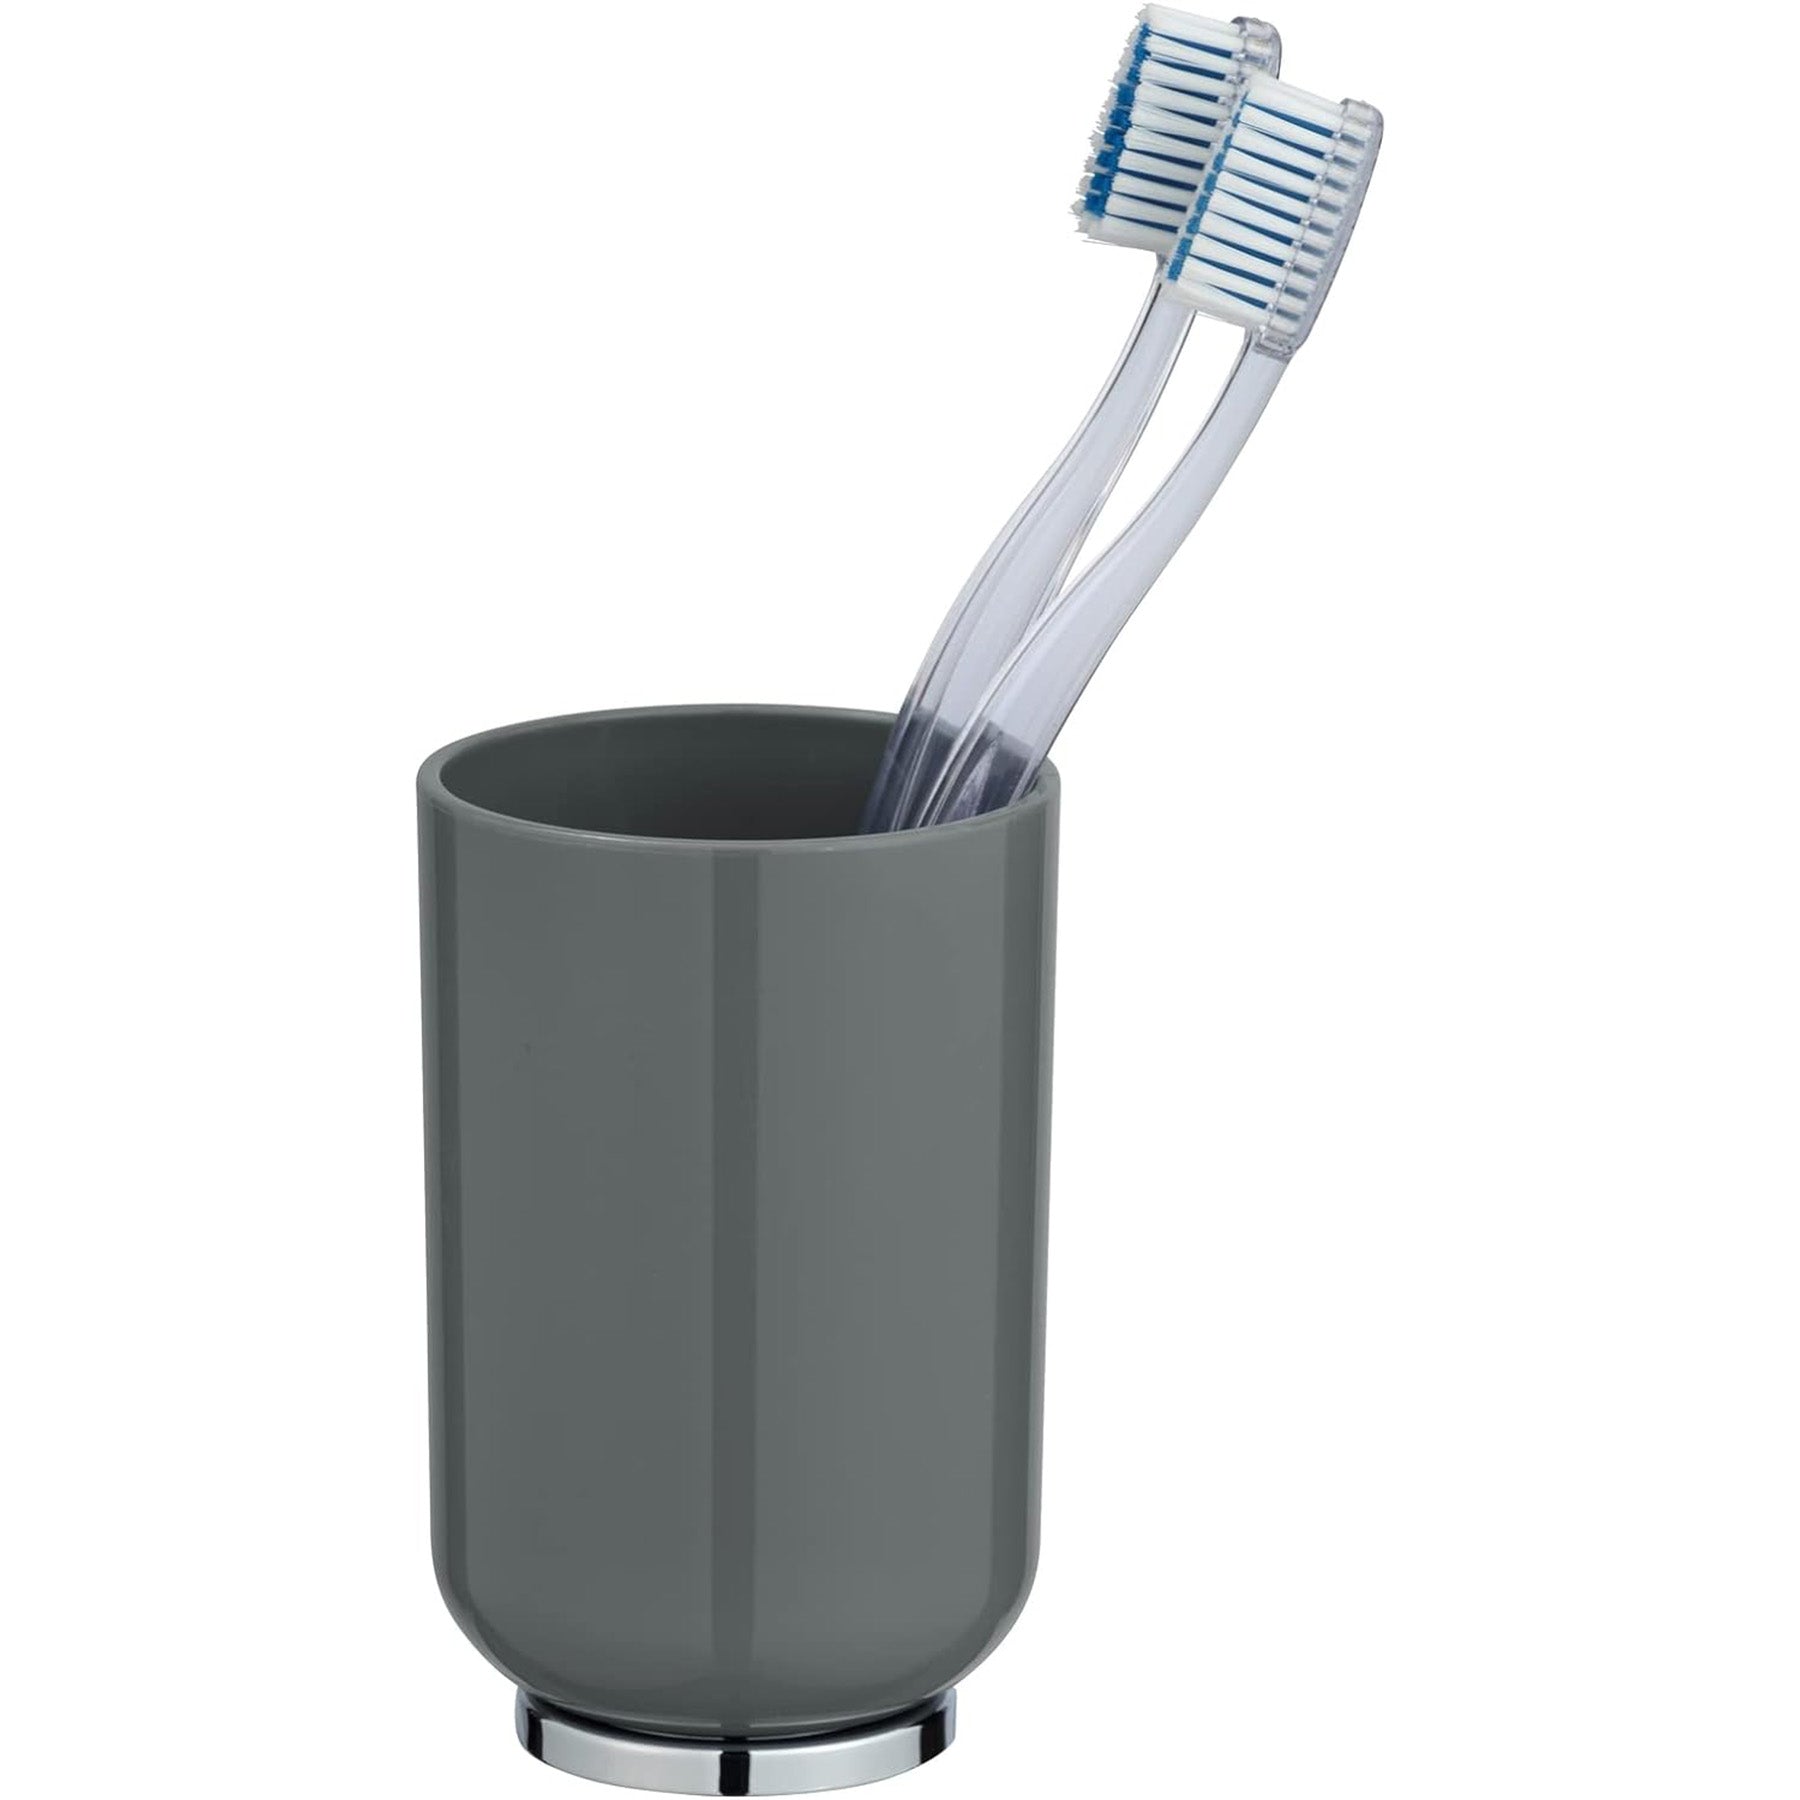 Cup Posa Holder for Toothbrush and Toothpaste, Grey/Chrome, 7 x 11 x 7 cm